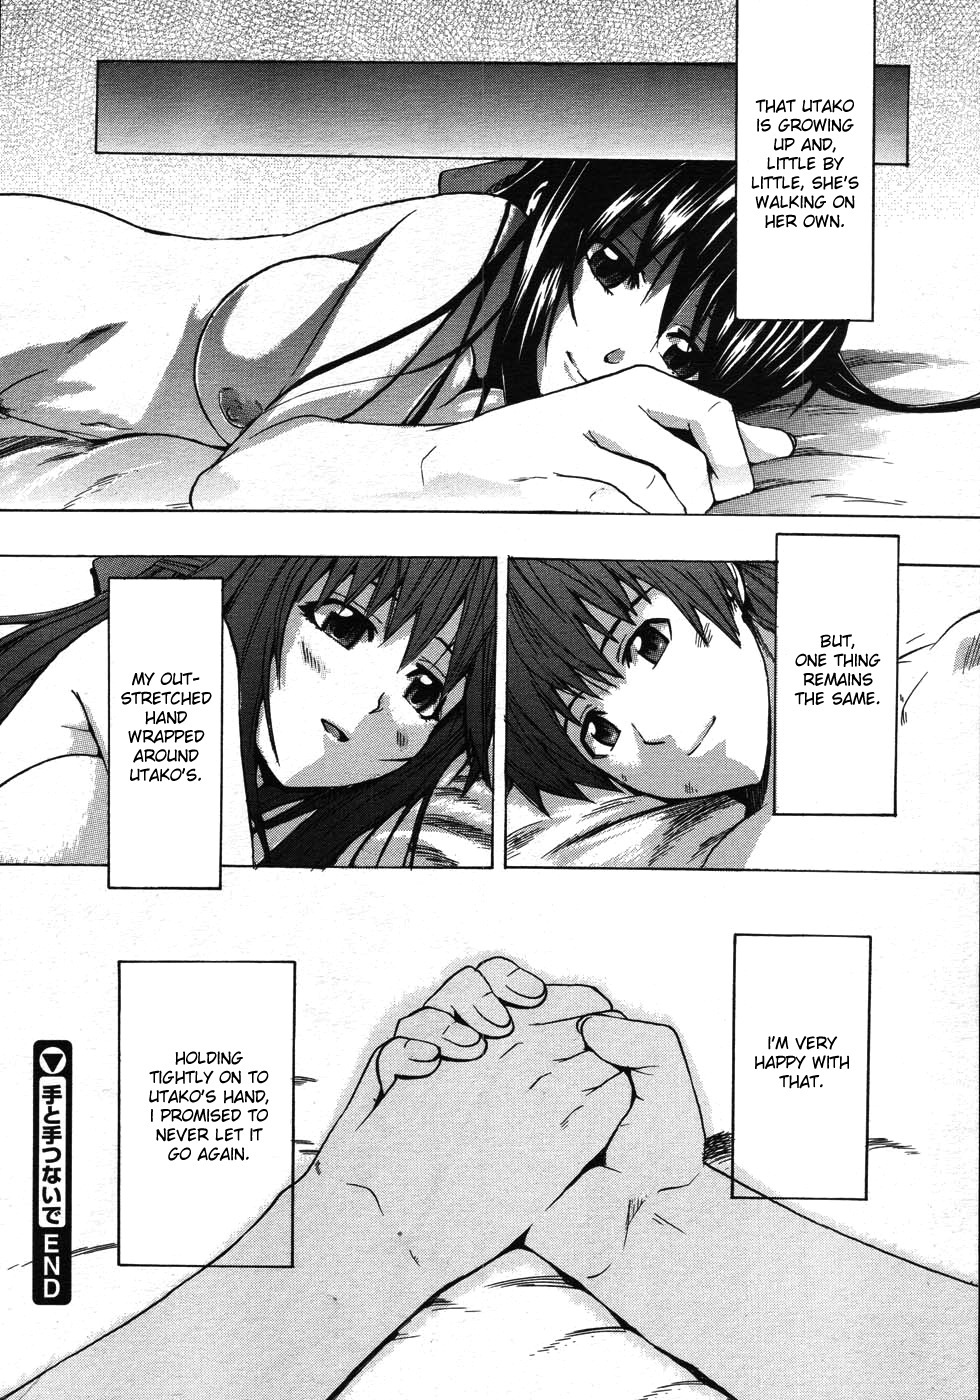 When you let go of my hands 97 hentai manga